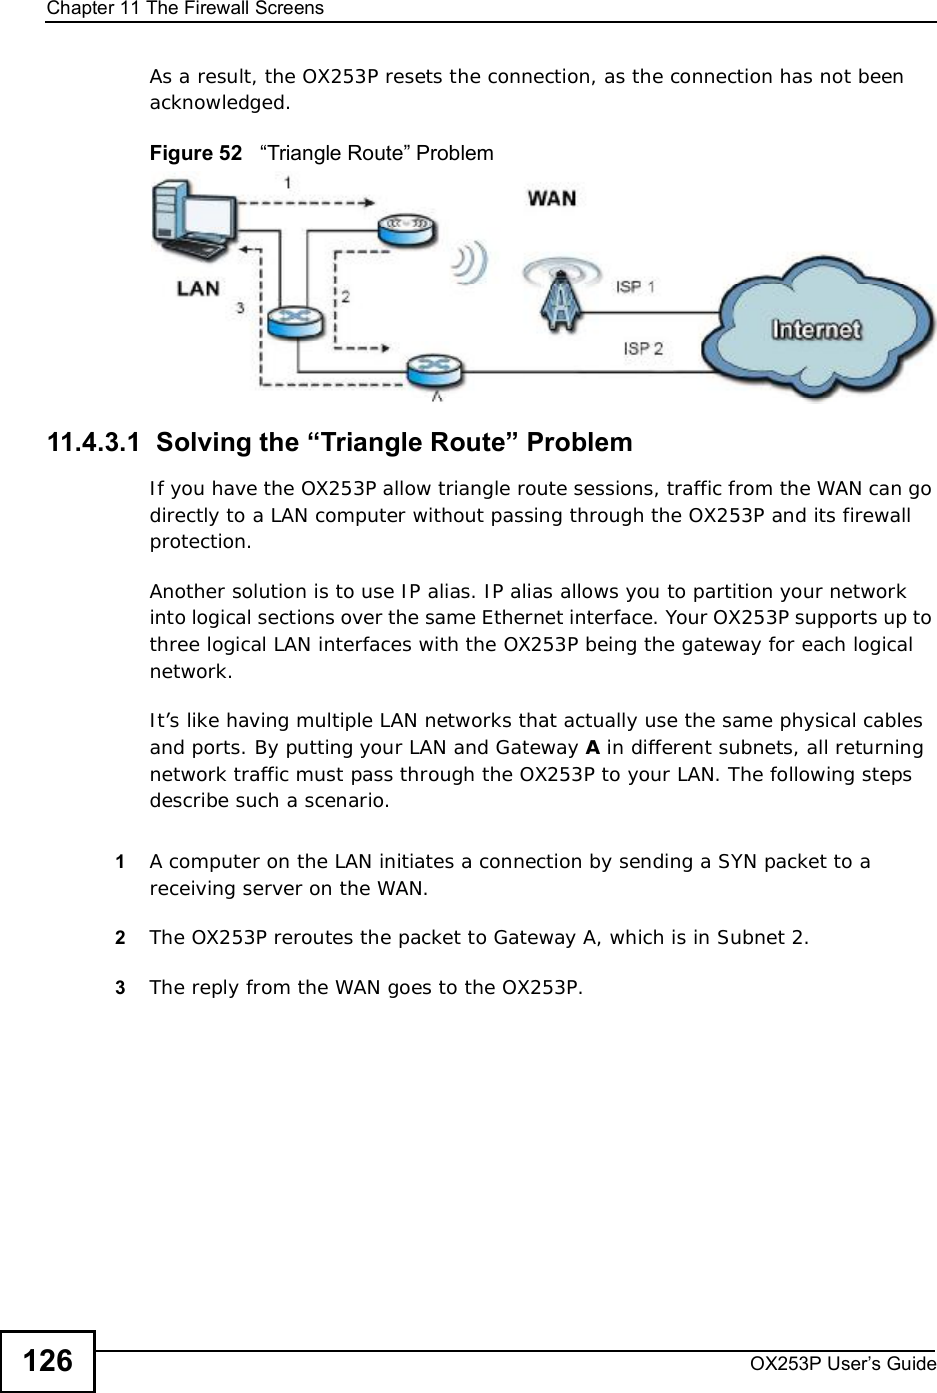 Chapter 11The Firewall ScreensOX253P User’s Guide126As a result, the OX253P resets the connection, as the connection has not been acknowledged.Figure 52   “Triangle Route” Problem11.4.3.1  Solving the “Triangle Route” ProblemIf you have the OX253P allow triangle route sessions, traffic from the WAN can go directly to a LAN computer without passing through the OX253P and its firewall protection. Another solution is to use IP alias. IP alias allows you to partition your network into logical sections over the same Ethernet interface. Your OX253P supports up to three logical LAN interfaces with the OX253P being the gateway for each logical network. It’s like having multiple LAN networks that actually use the same physical cables and ports. By putting your LAN and Gateway A in different subnets, all returning network traffic must pass through the OX253P to your LAN. The following steps describe such a scenario.1A computer on the LAN initiates a connection by sending a SYN packet to a receiving server on the WAN. 2The OX253Preroutes the packet to Gateway A, which is in Subnet 2. 3The reply from the WAN goes to the OX253P. 